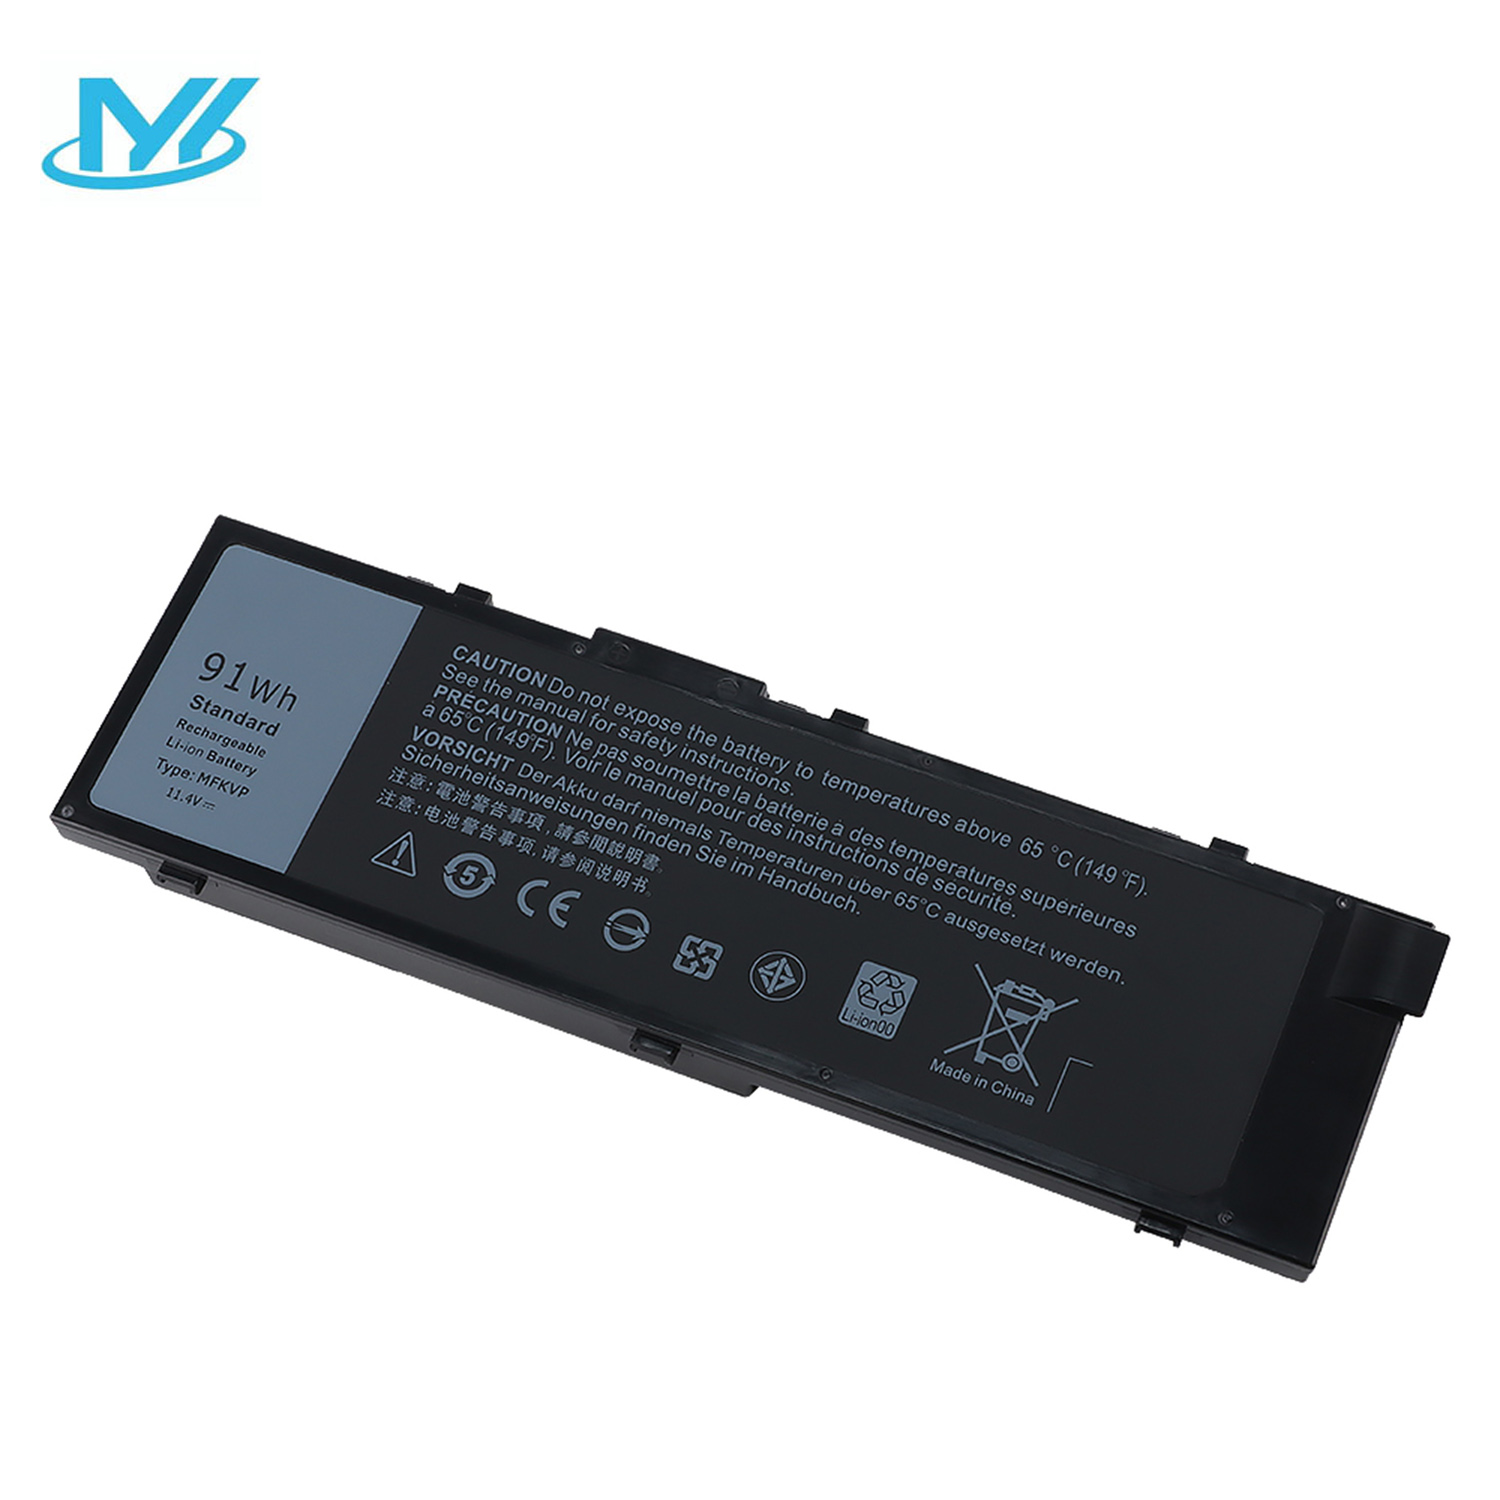 MFKVP rechargeable lithium ion laptop Battery 11.4V 91Wh T05W1 GR5D3 0GR5D3 0FNY7 RDYCT for Dell laptop Precision 15 7510 7520 17 7710 7720 M7510 M7710